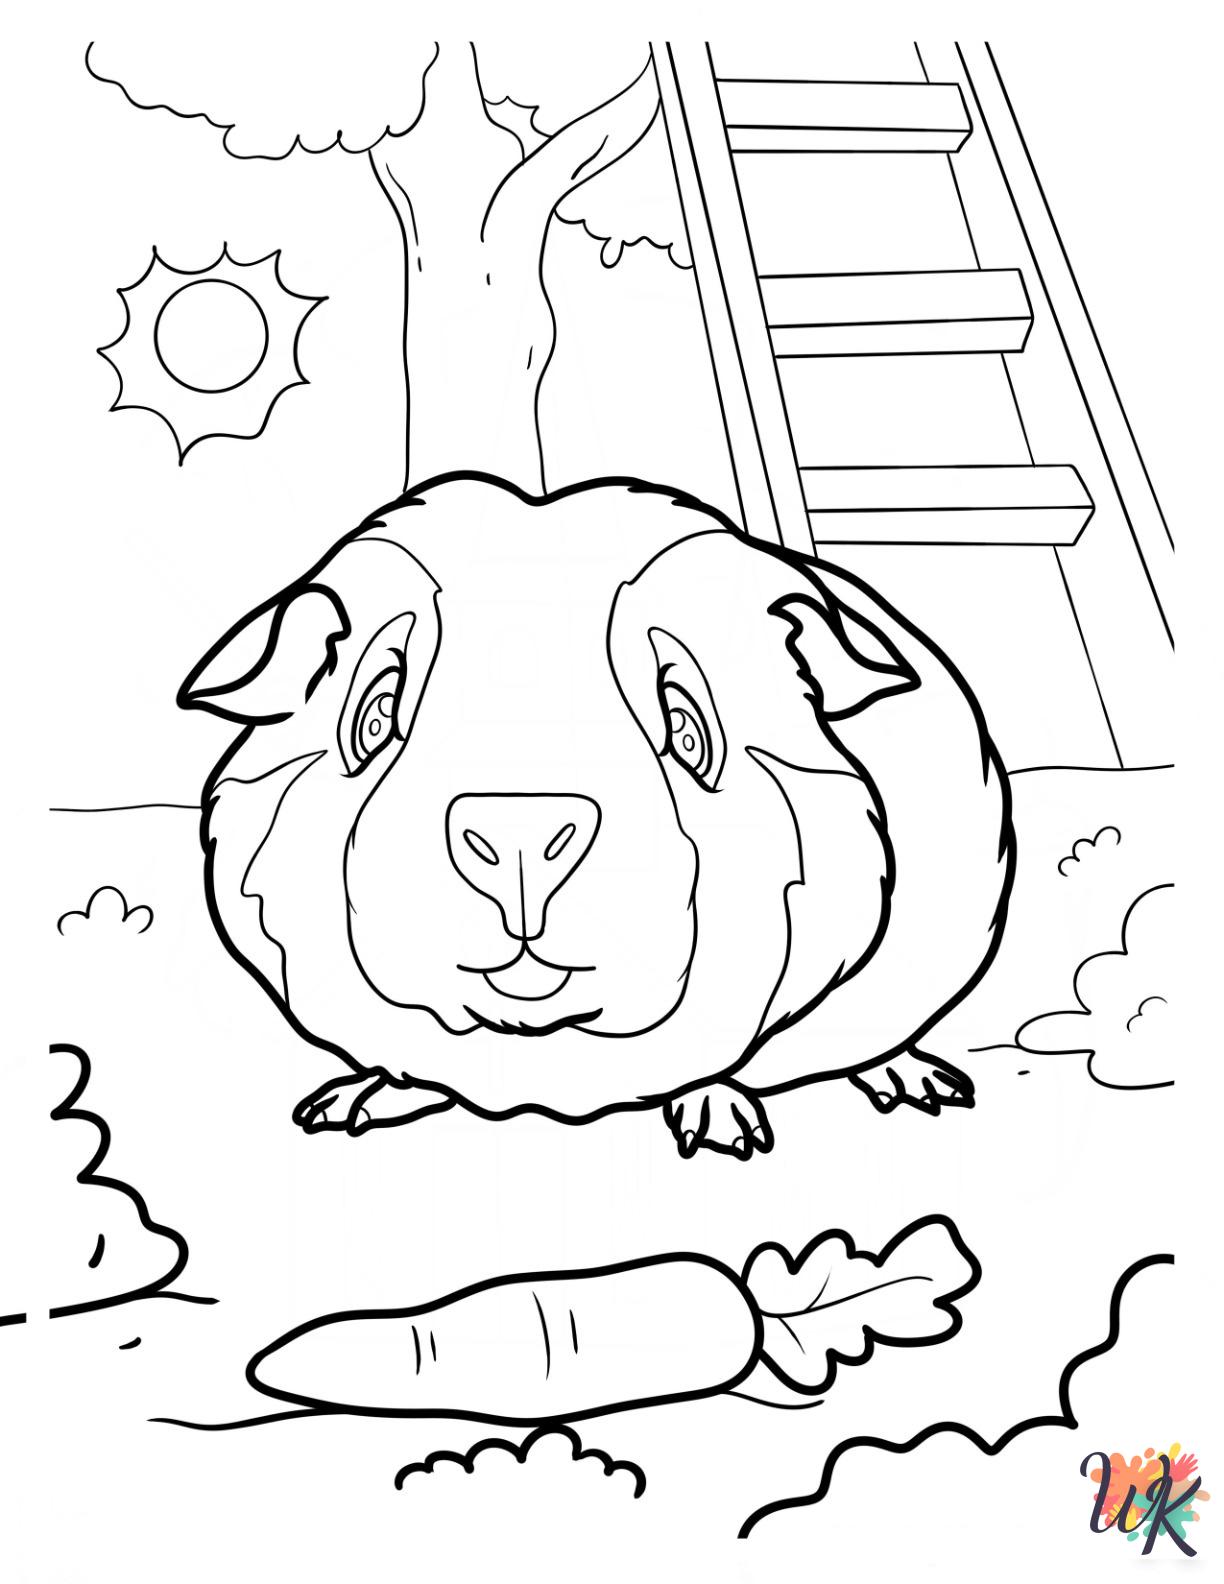 Guinea Pig coloring pages printable